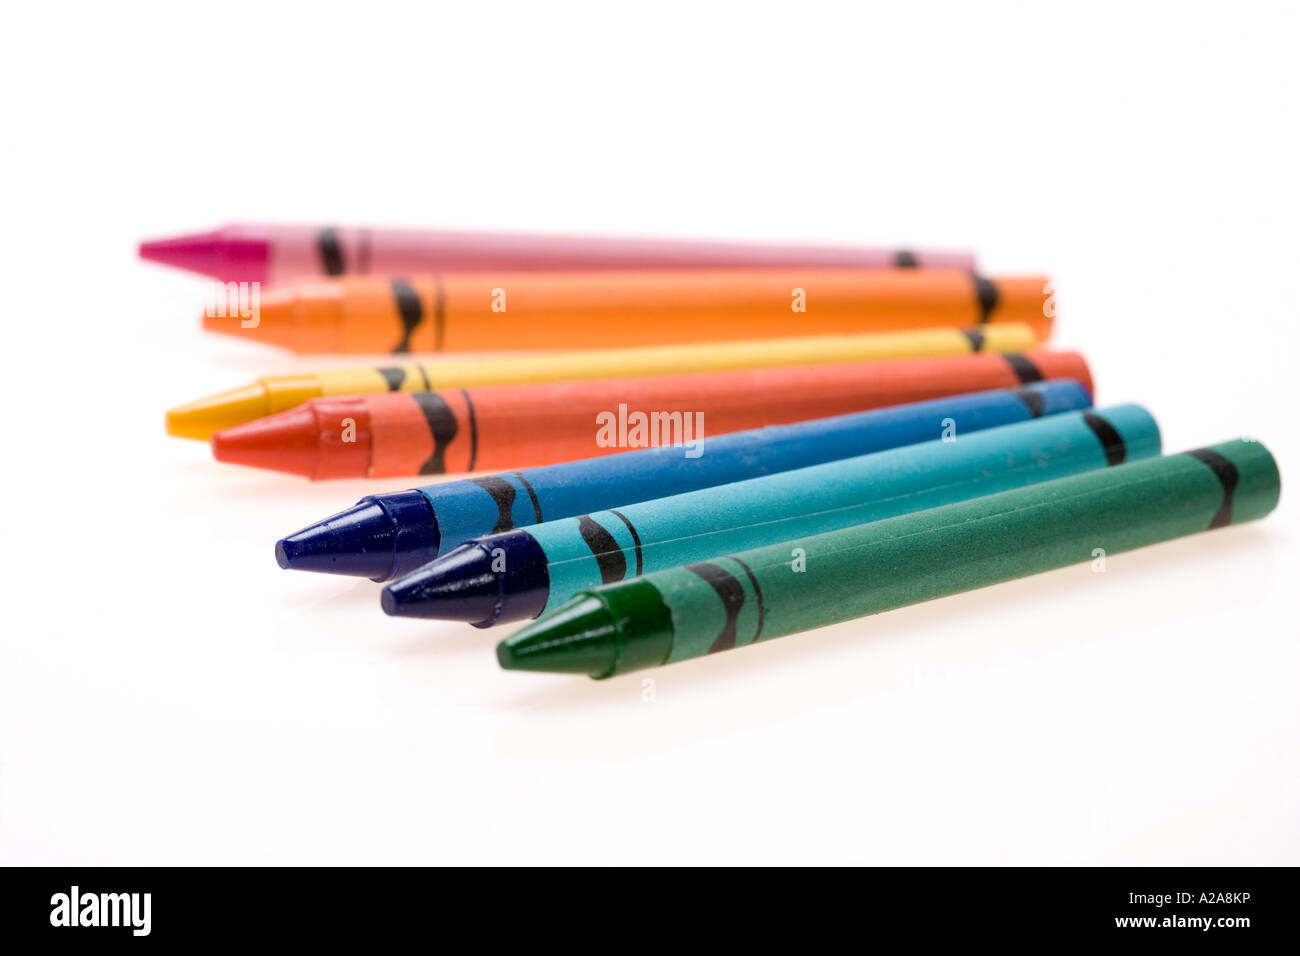 Multi colored crayons, unwrapped, no wrappers, isolated on white with copy  space. Great for web page, signage background, flyers and more Stock Photo  - Alamy